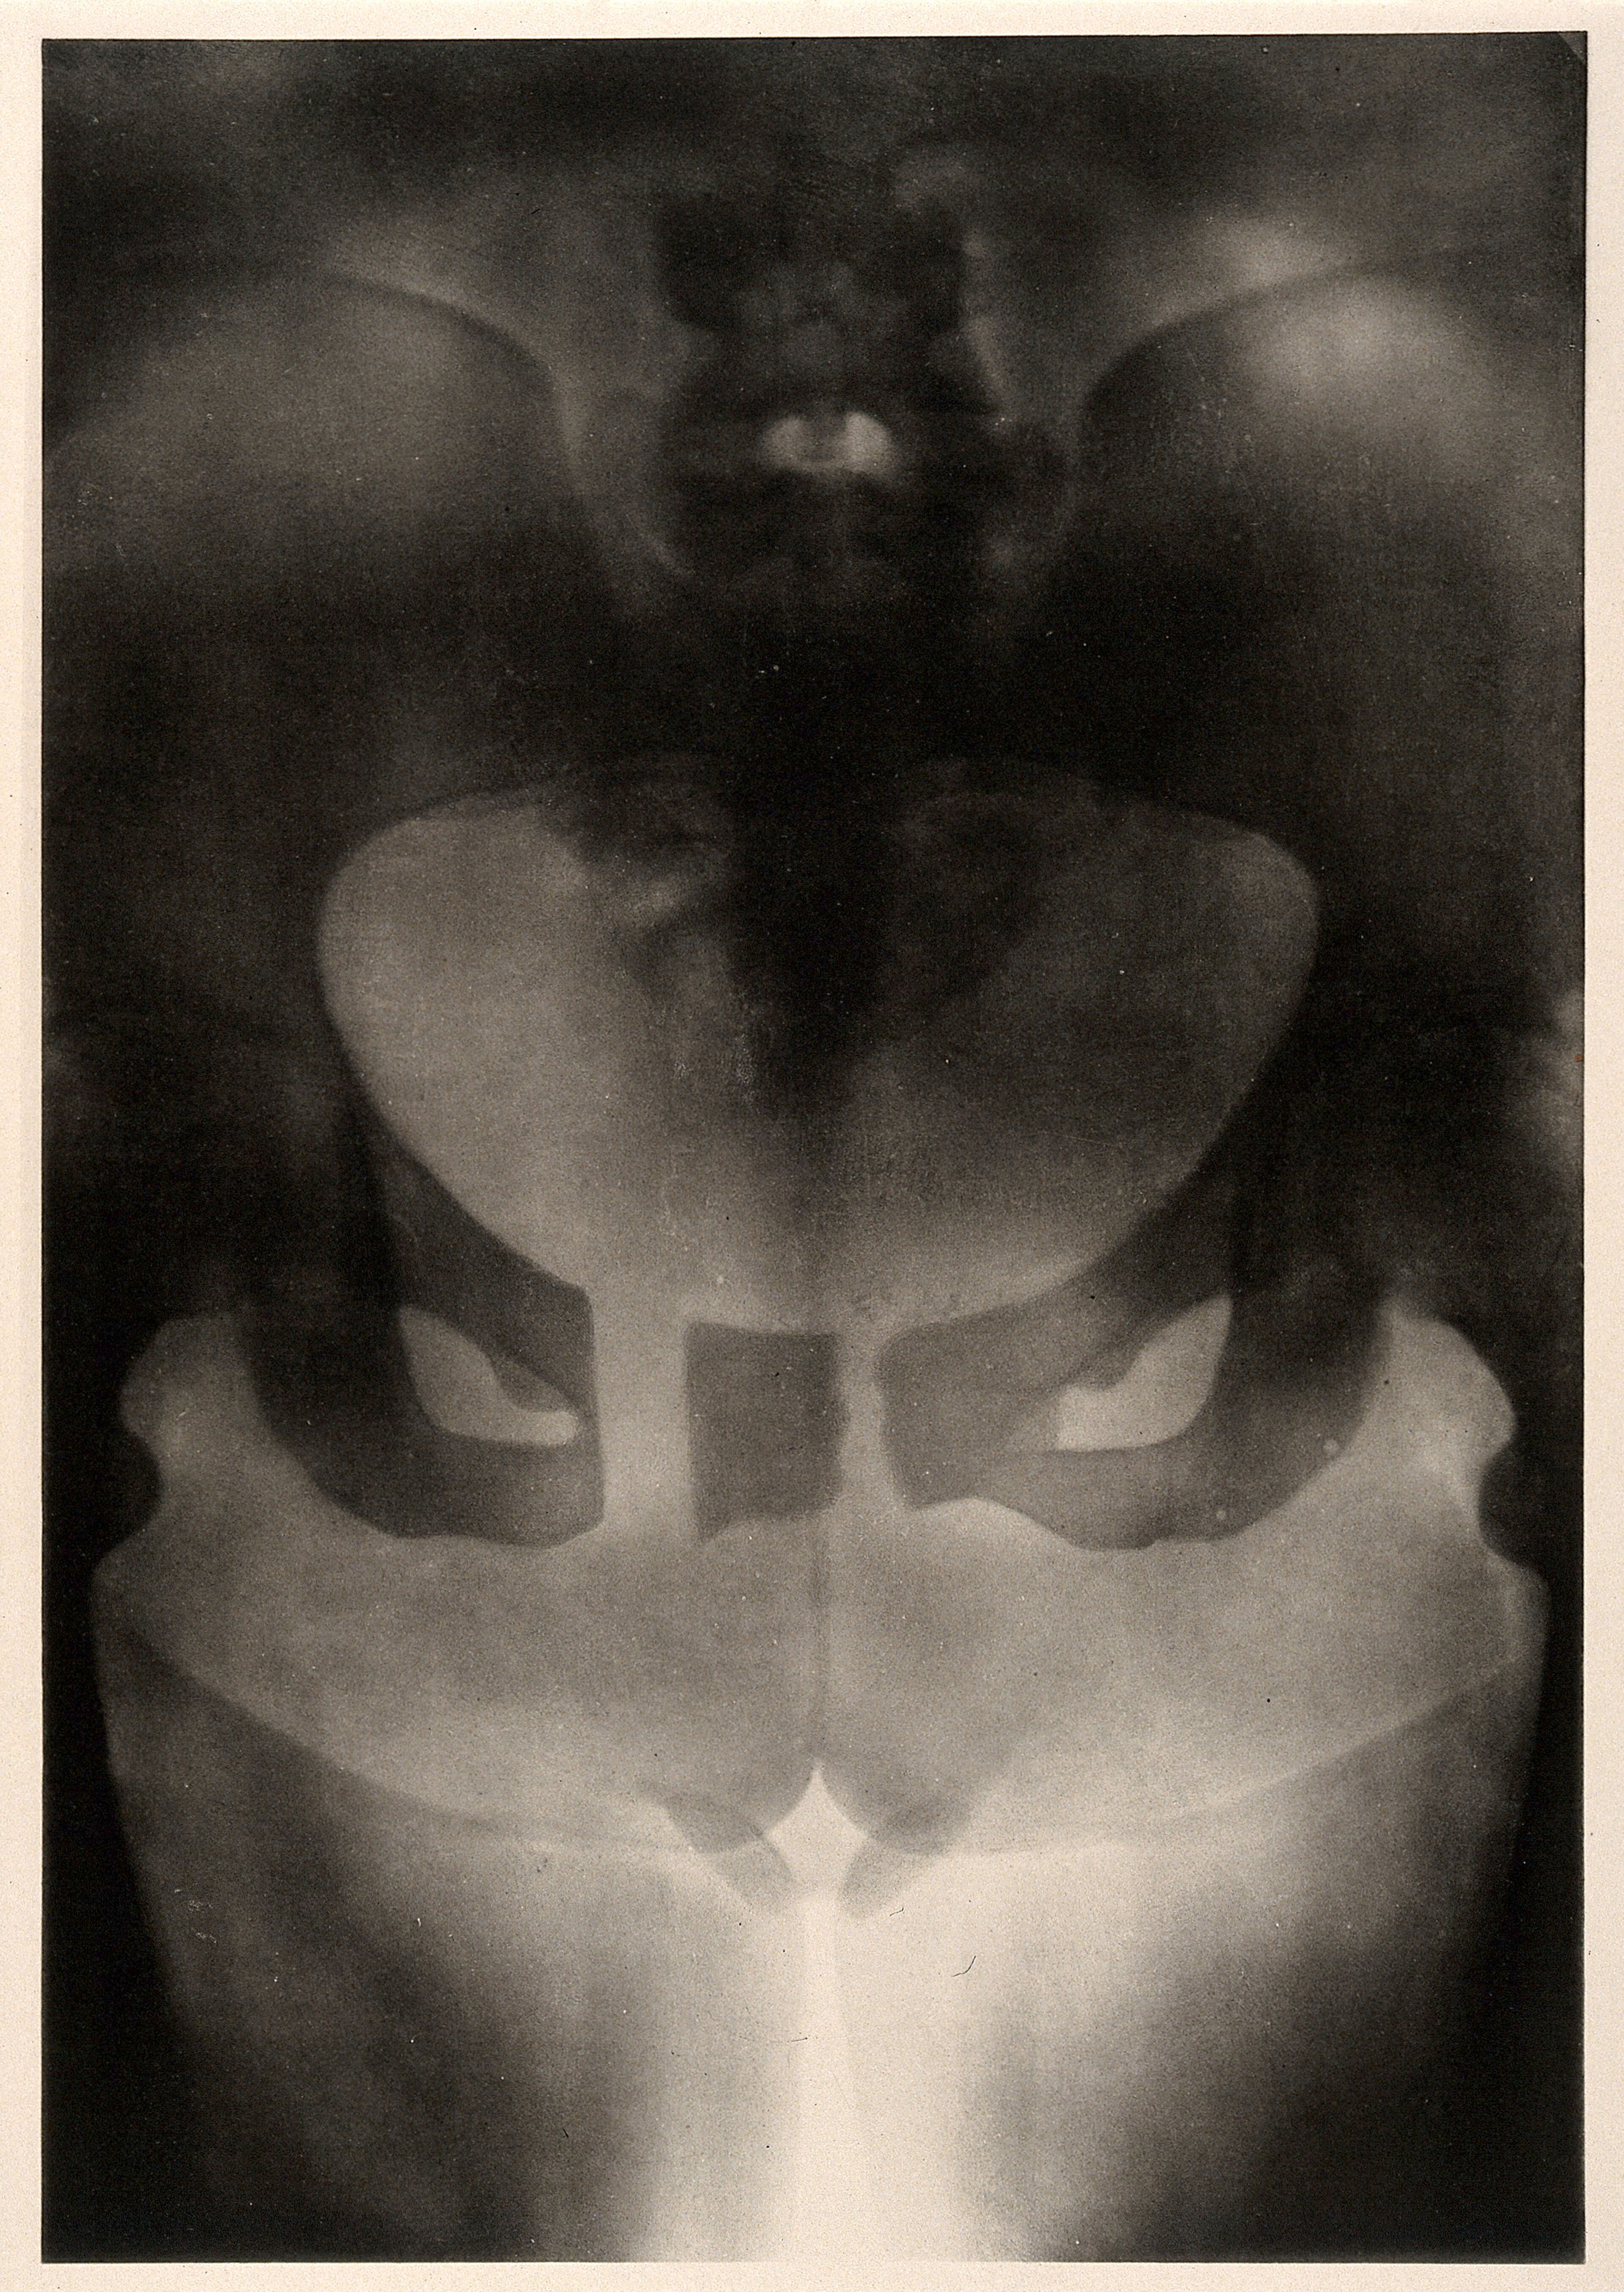 A woman's pelvis after a pubiotomy - to widen the birth canal for a vaginal delivery of a baby - previous two babies died. Collotype by Römmler & Jonas after a radiograph made for G. Leopold and Th. Leisewitz, 1908.